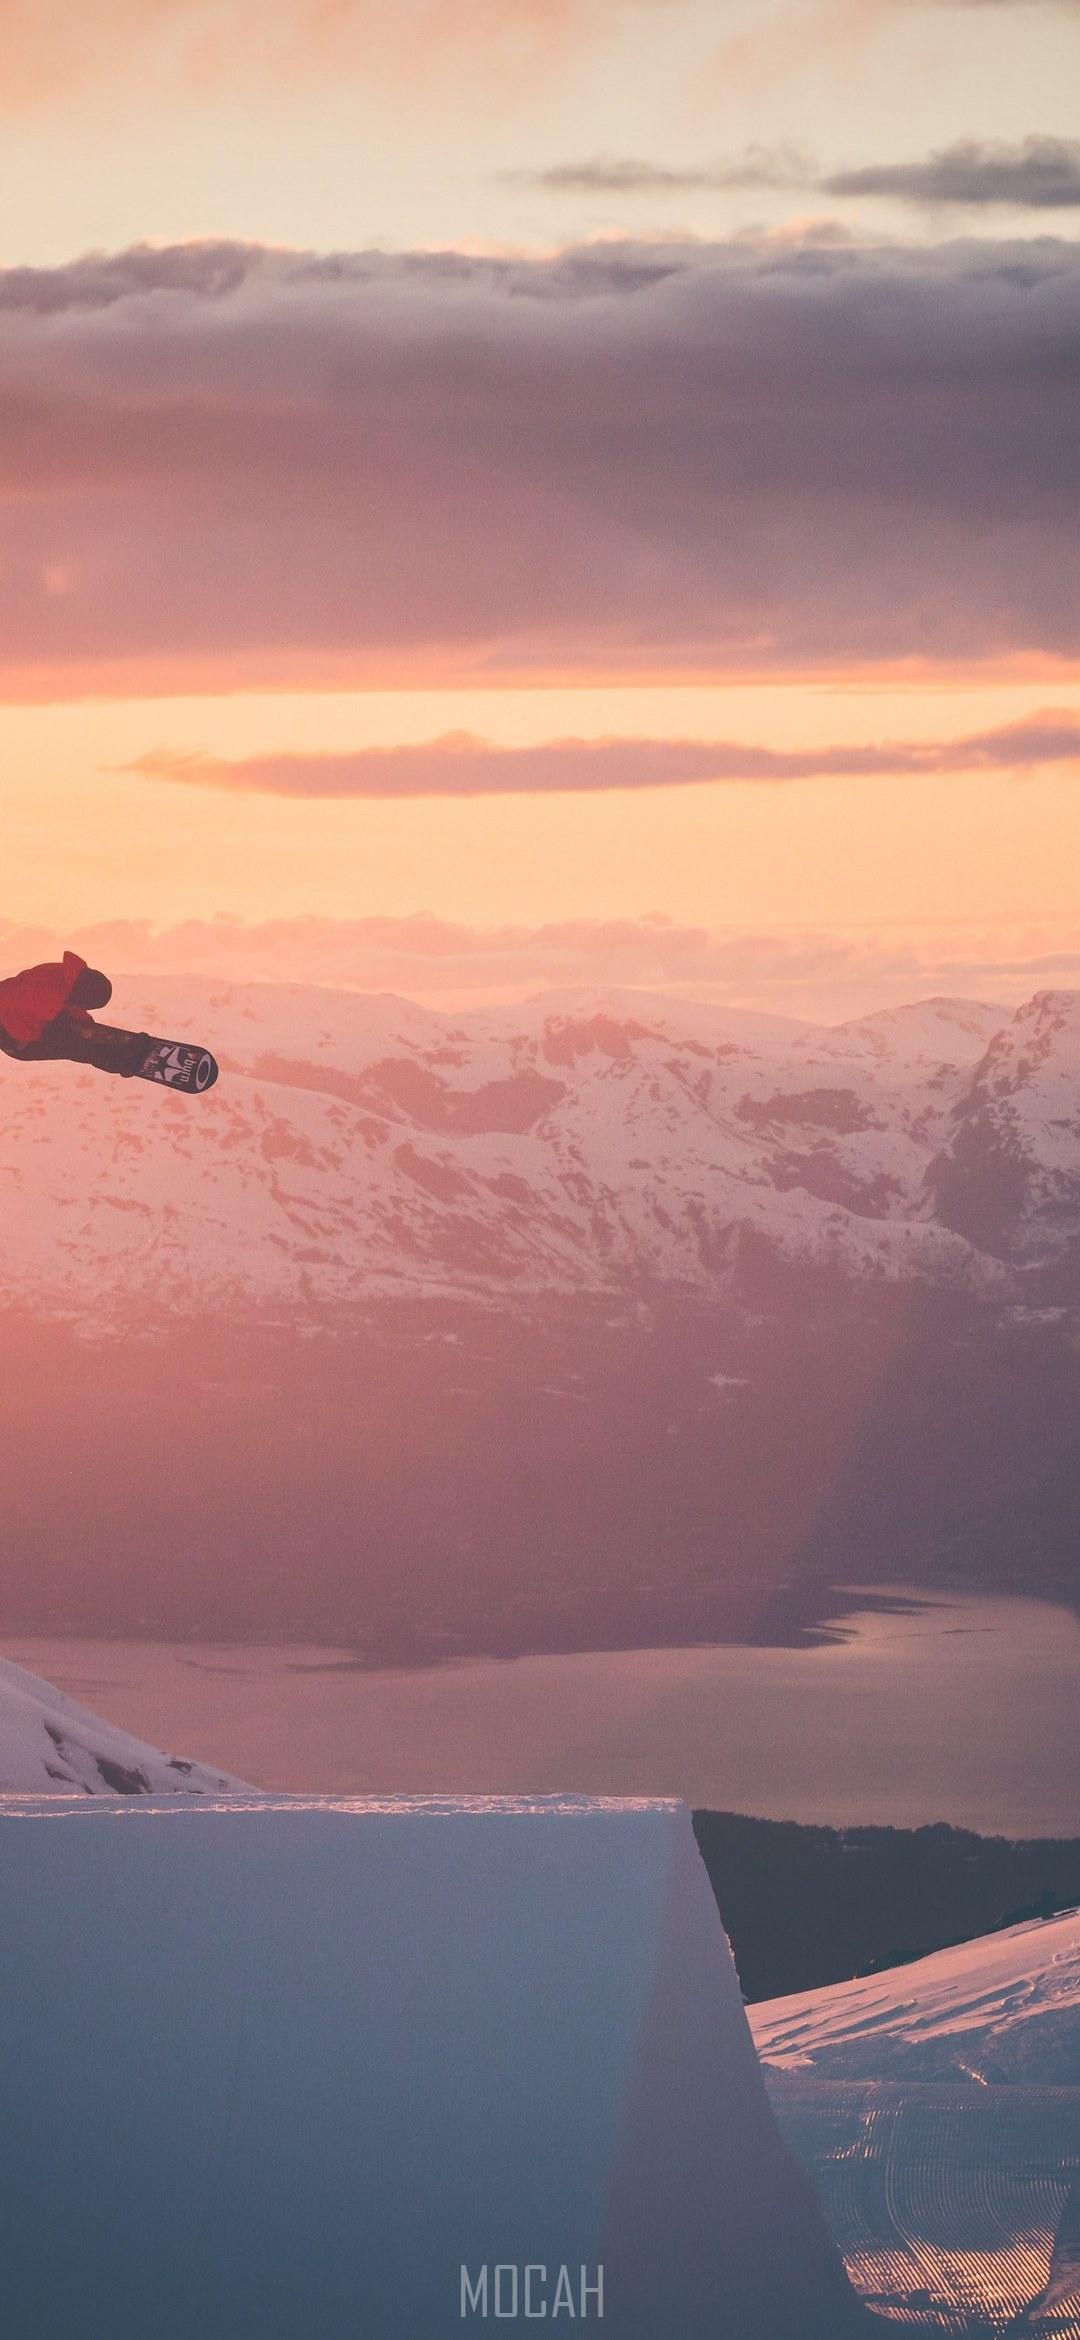 HD wallpaper, 1080X2340, A Snowboarder Is Airborne Surrounded By Golden Skies And Snowy Mountains, Vivo S1 Wallpaper Download, Snowboarder In Flight